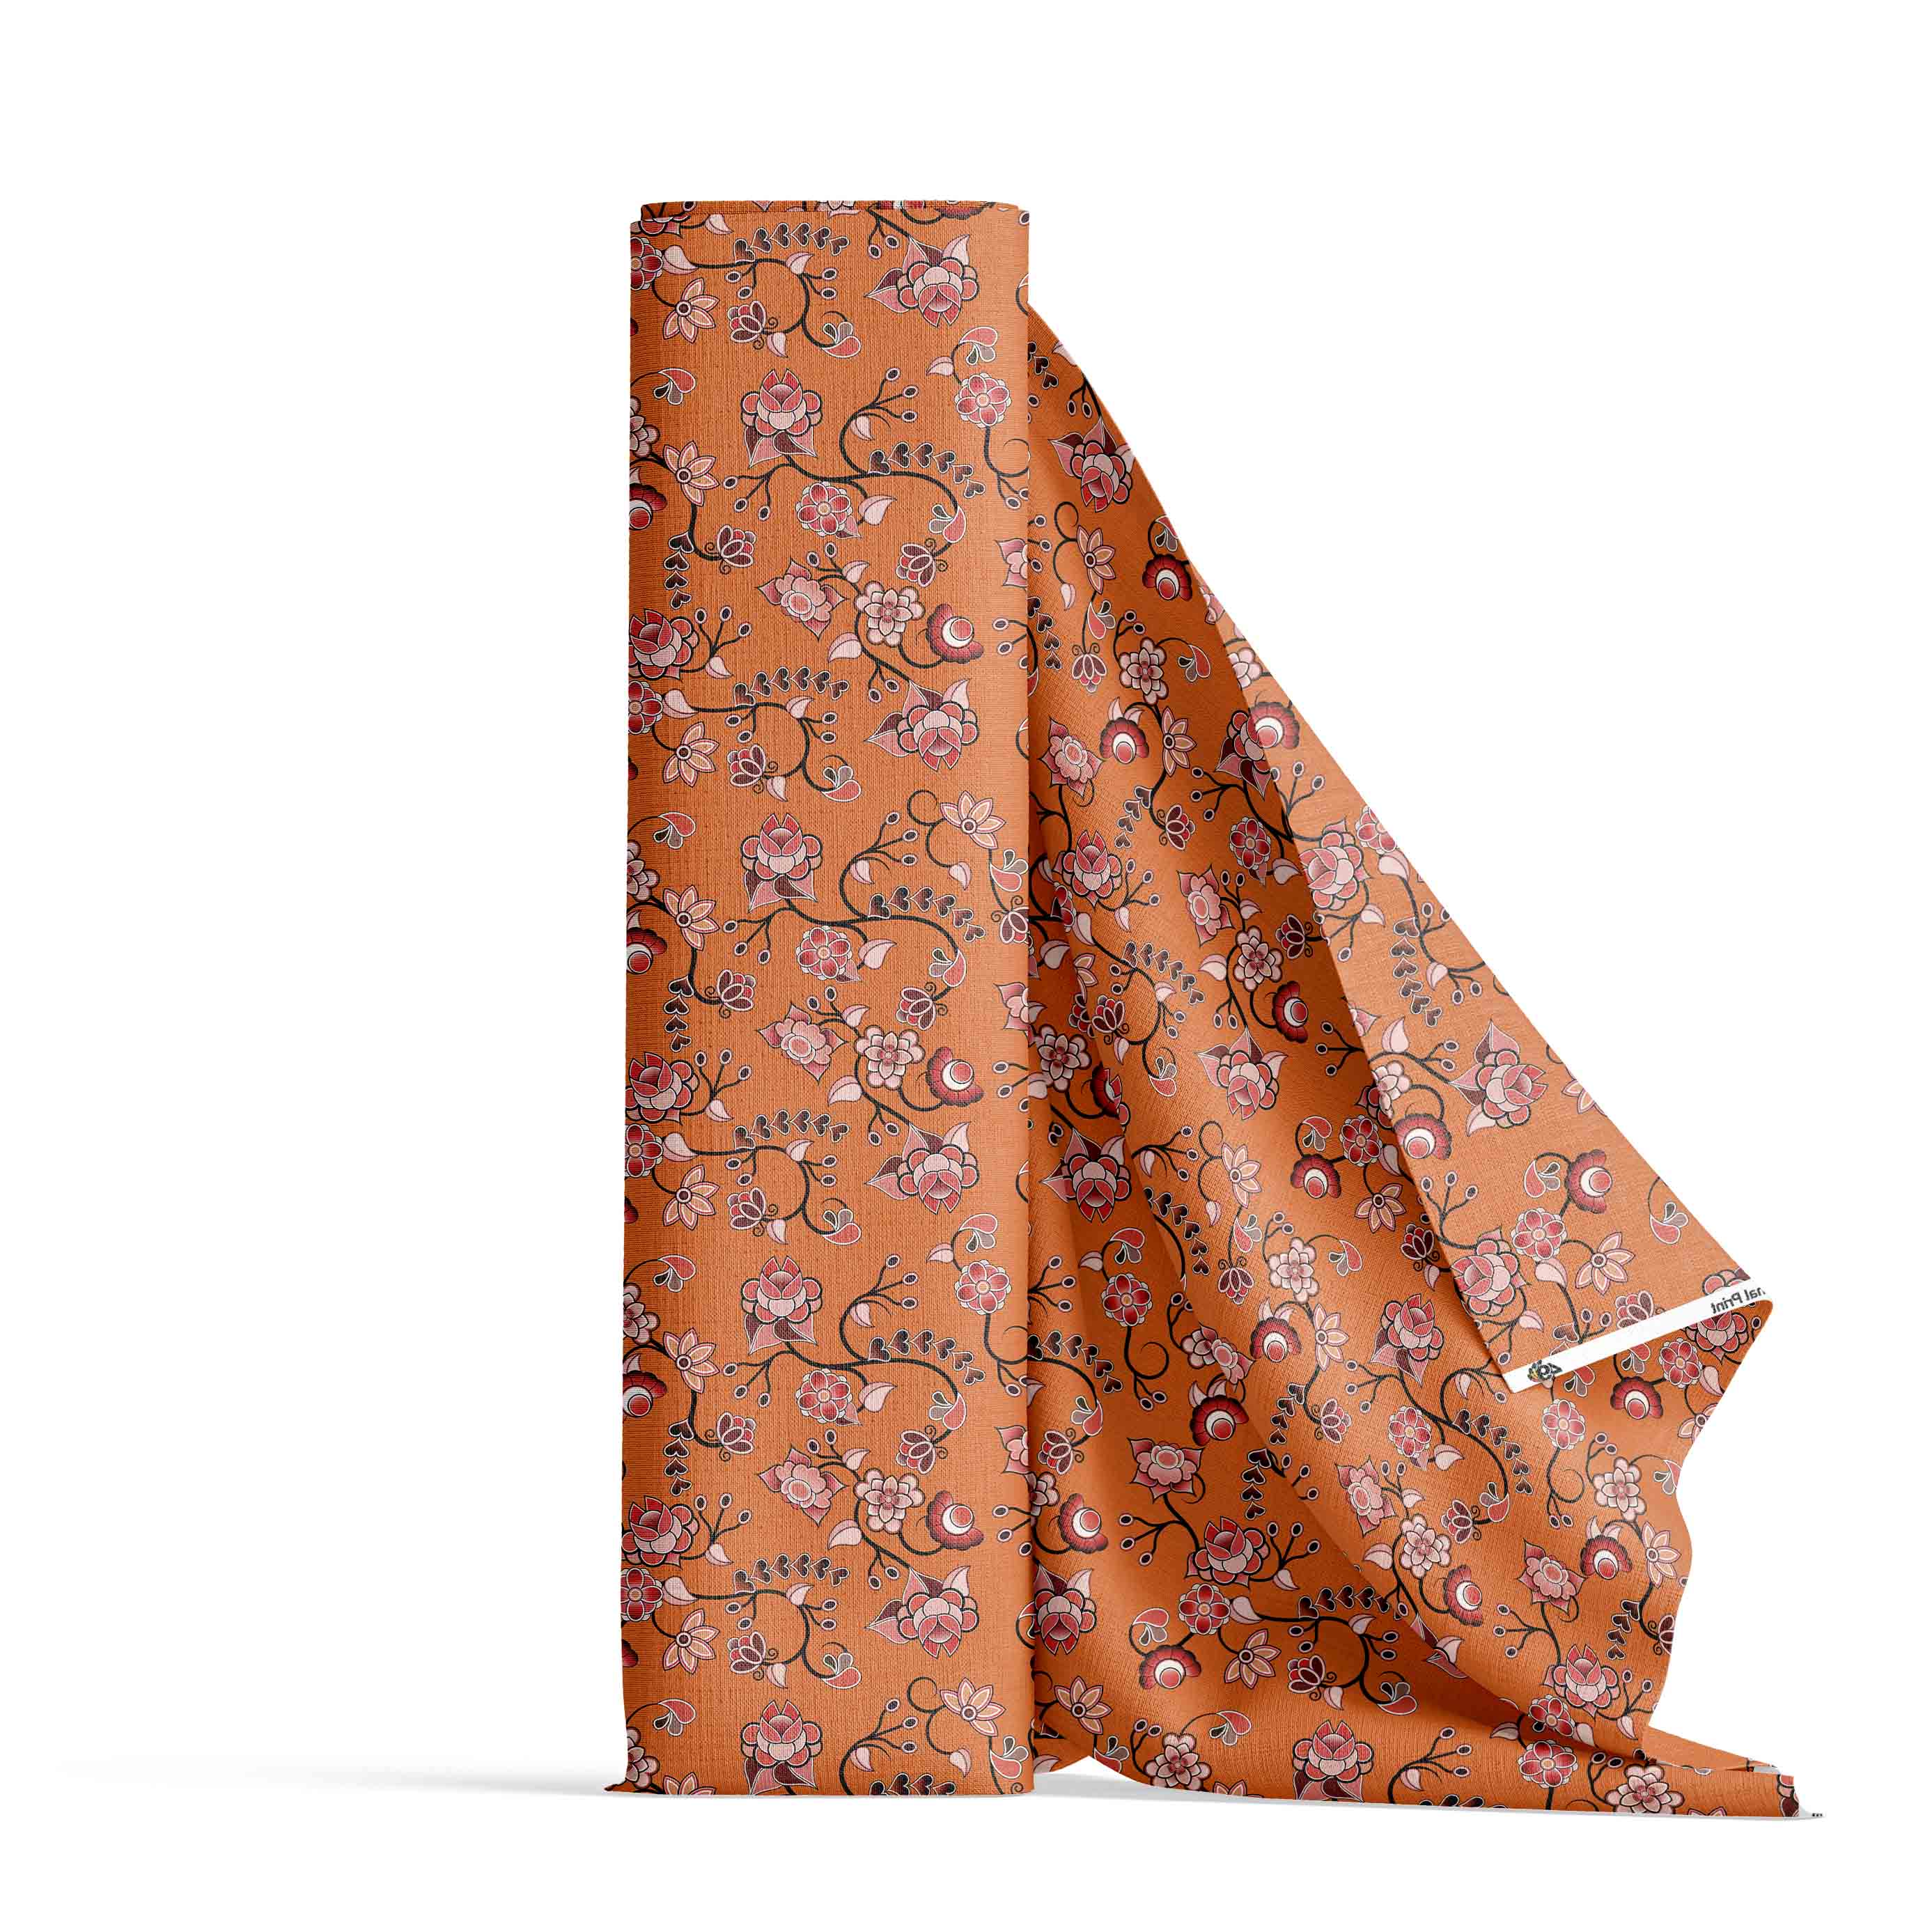 Floral Amour Orange Cotton Poplin Fabric By the Yard